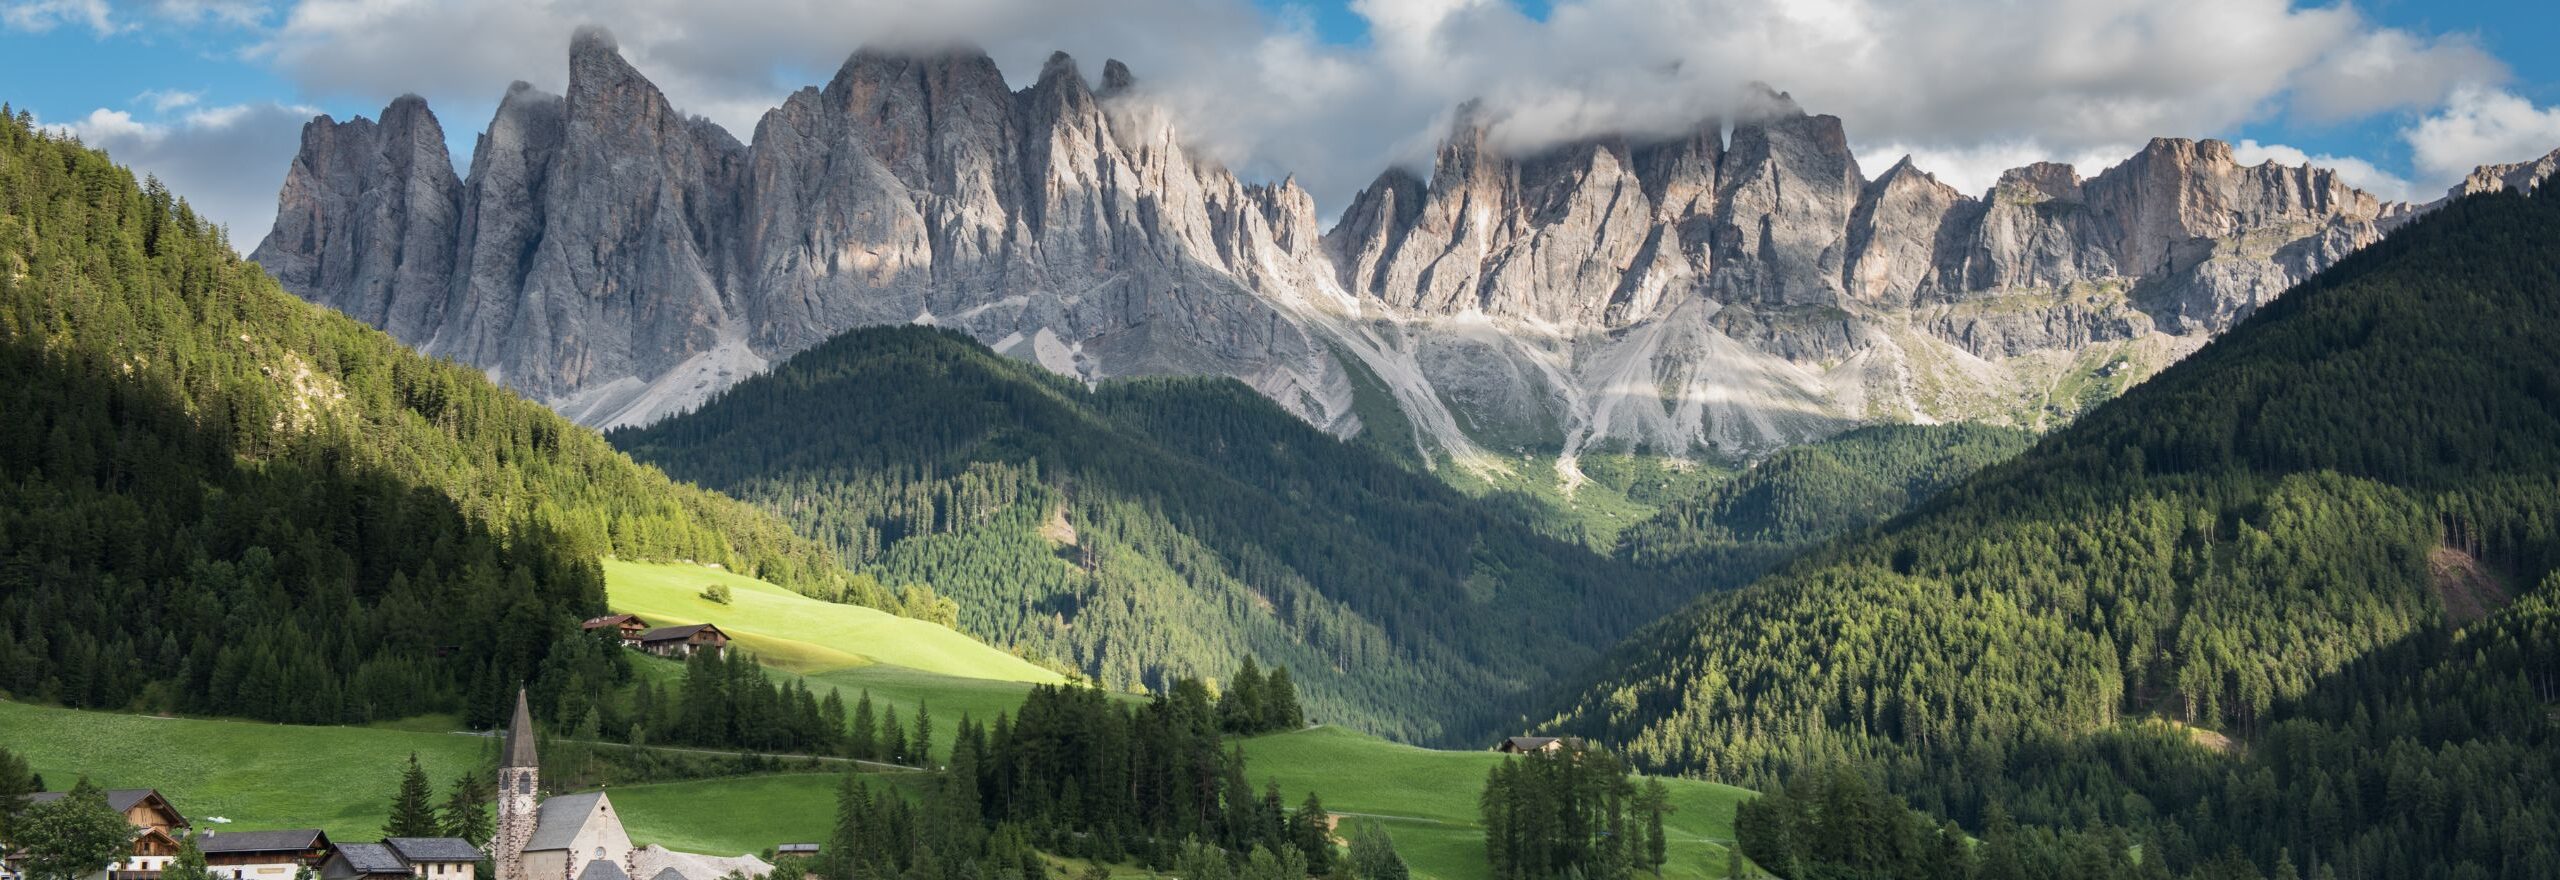 Self Guided Tour in the Dolomites of Italy